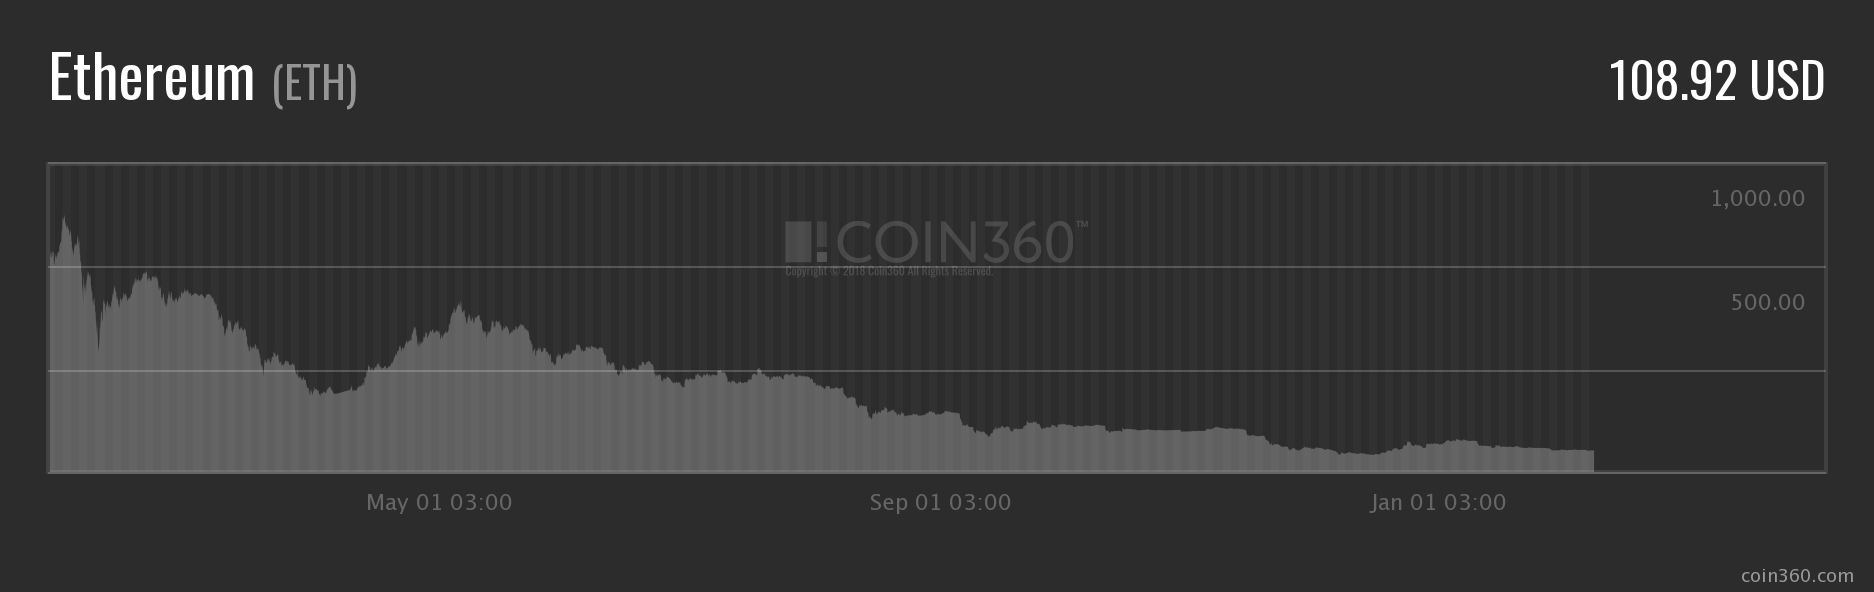 Eth Price Fluctuations in 2018